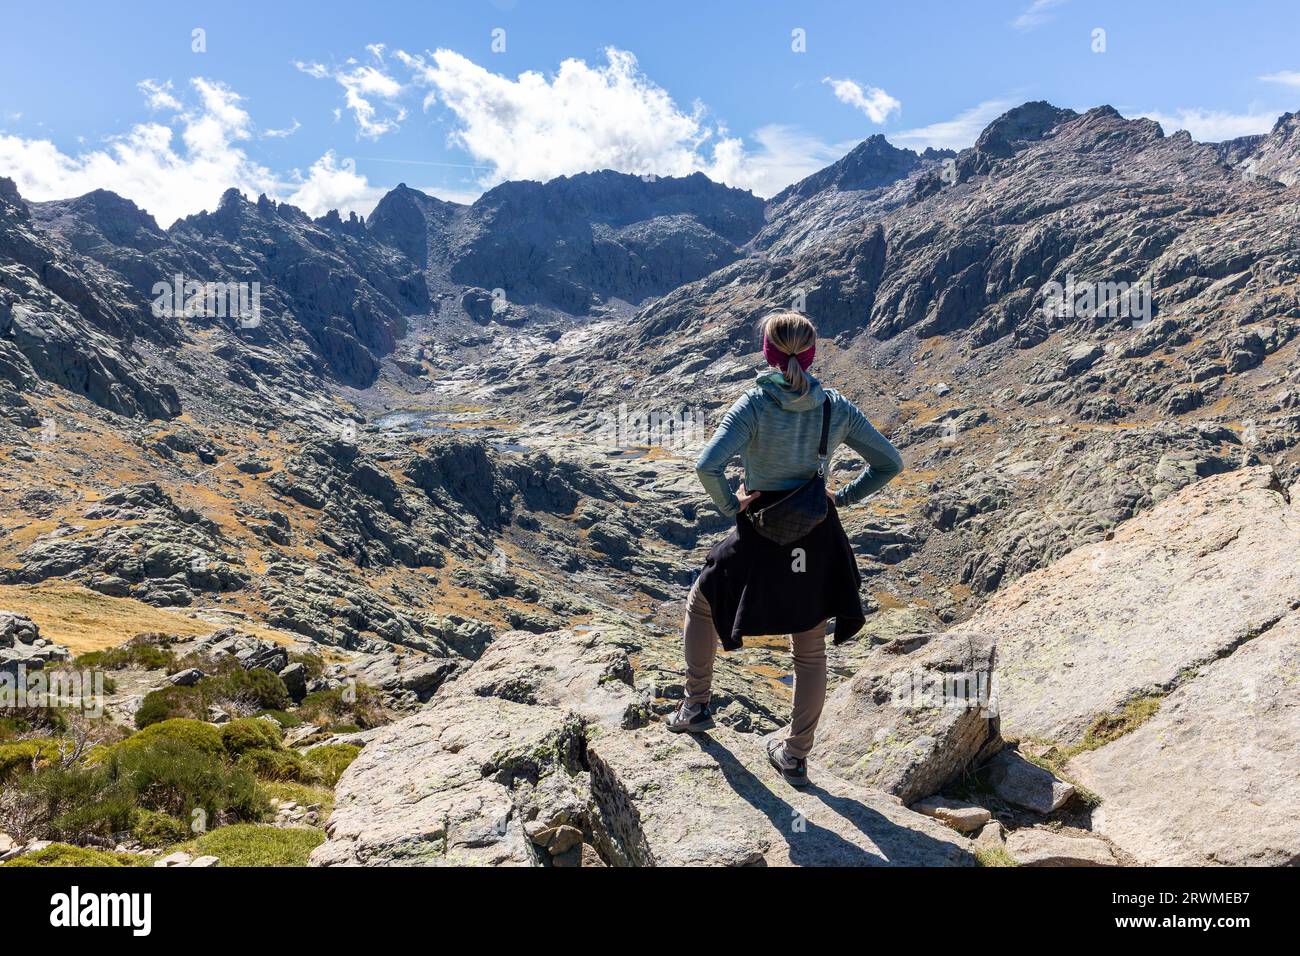 Female tourist hiking to the Laguna Grande de Gredos in Sierra de Gredos, high rocky mountains and lake in the background, autumn view. Stock Photo